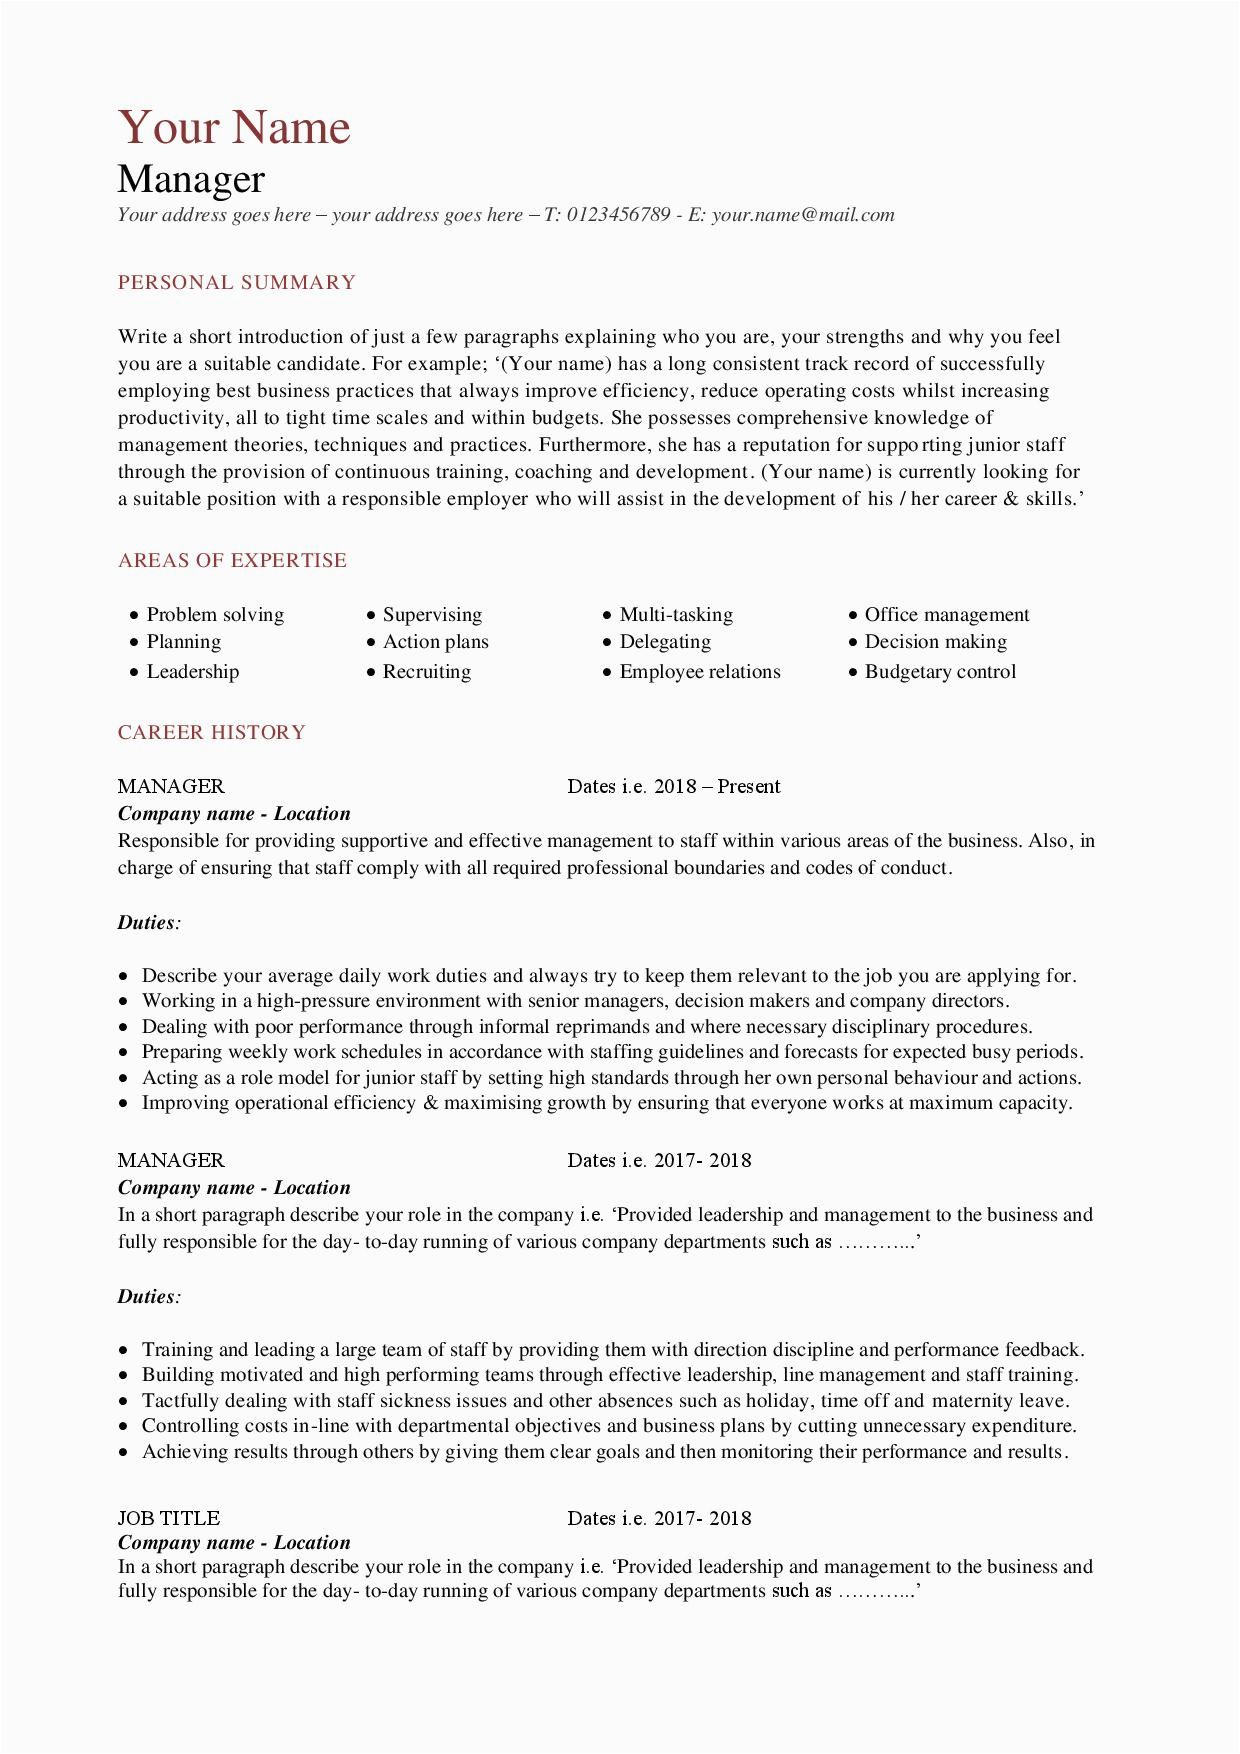 resume template for someone who has never worked